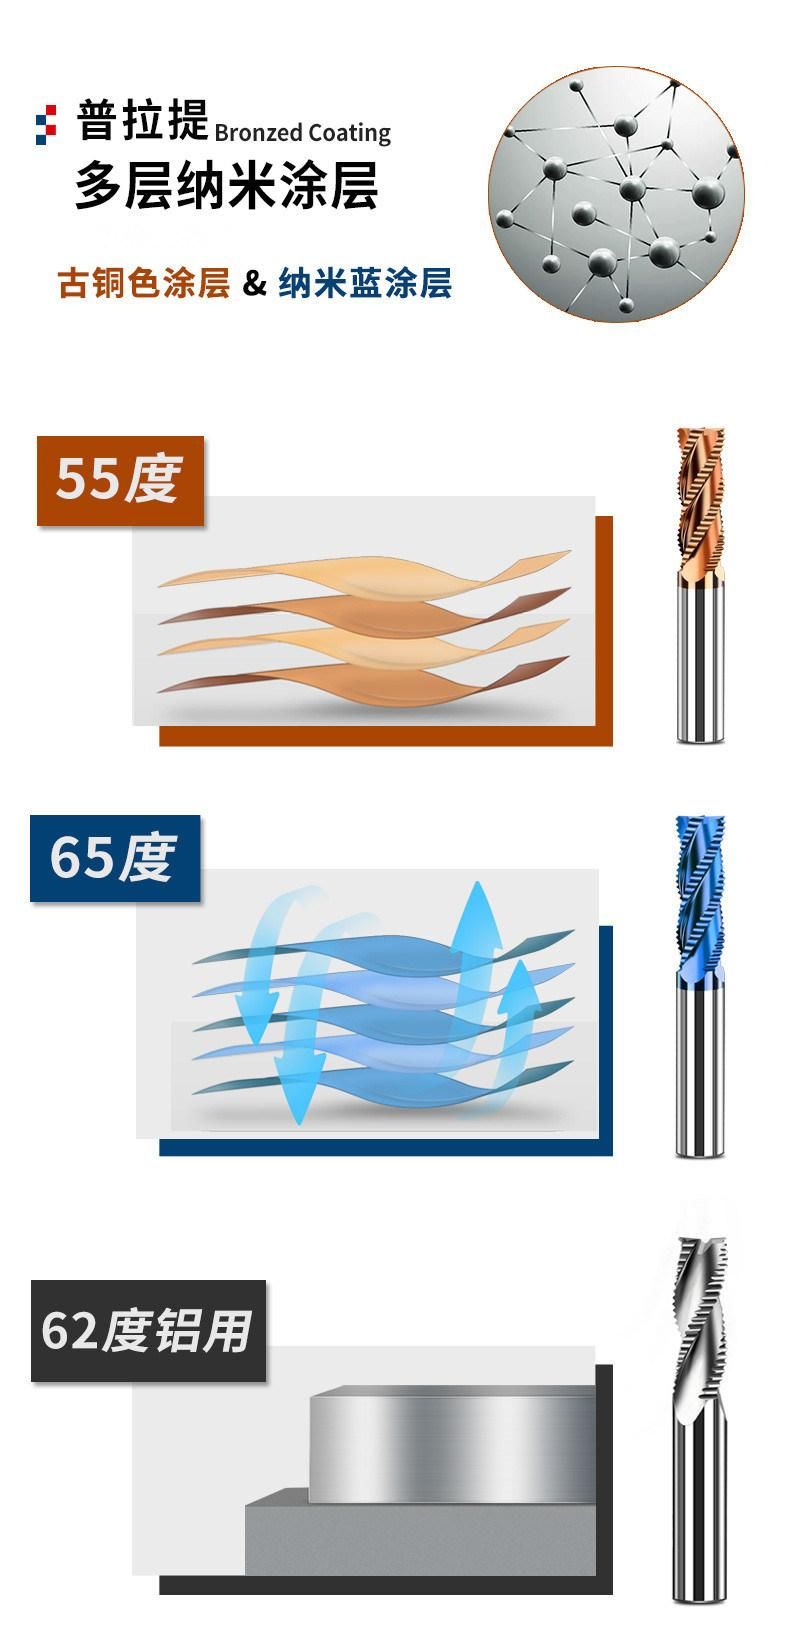 Coated Solid Carbide CNC Endmill for Steel, Stainless Steel, Non-Ferrous Metal Nano Coating Submicron Carbide Material